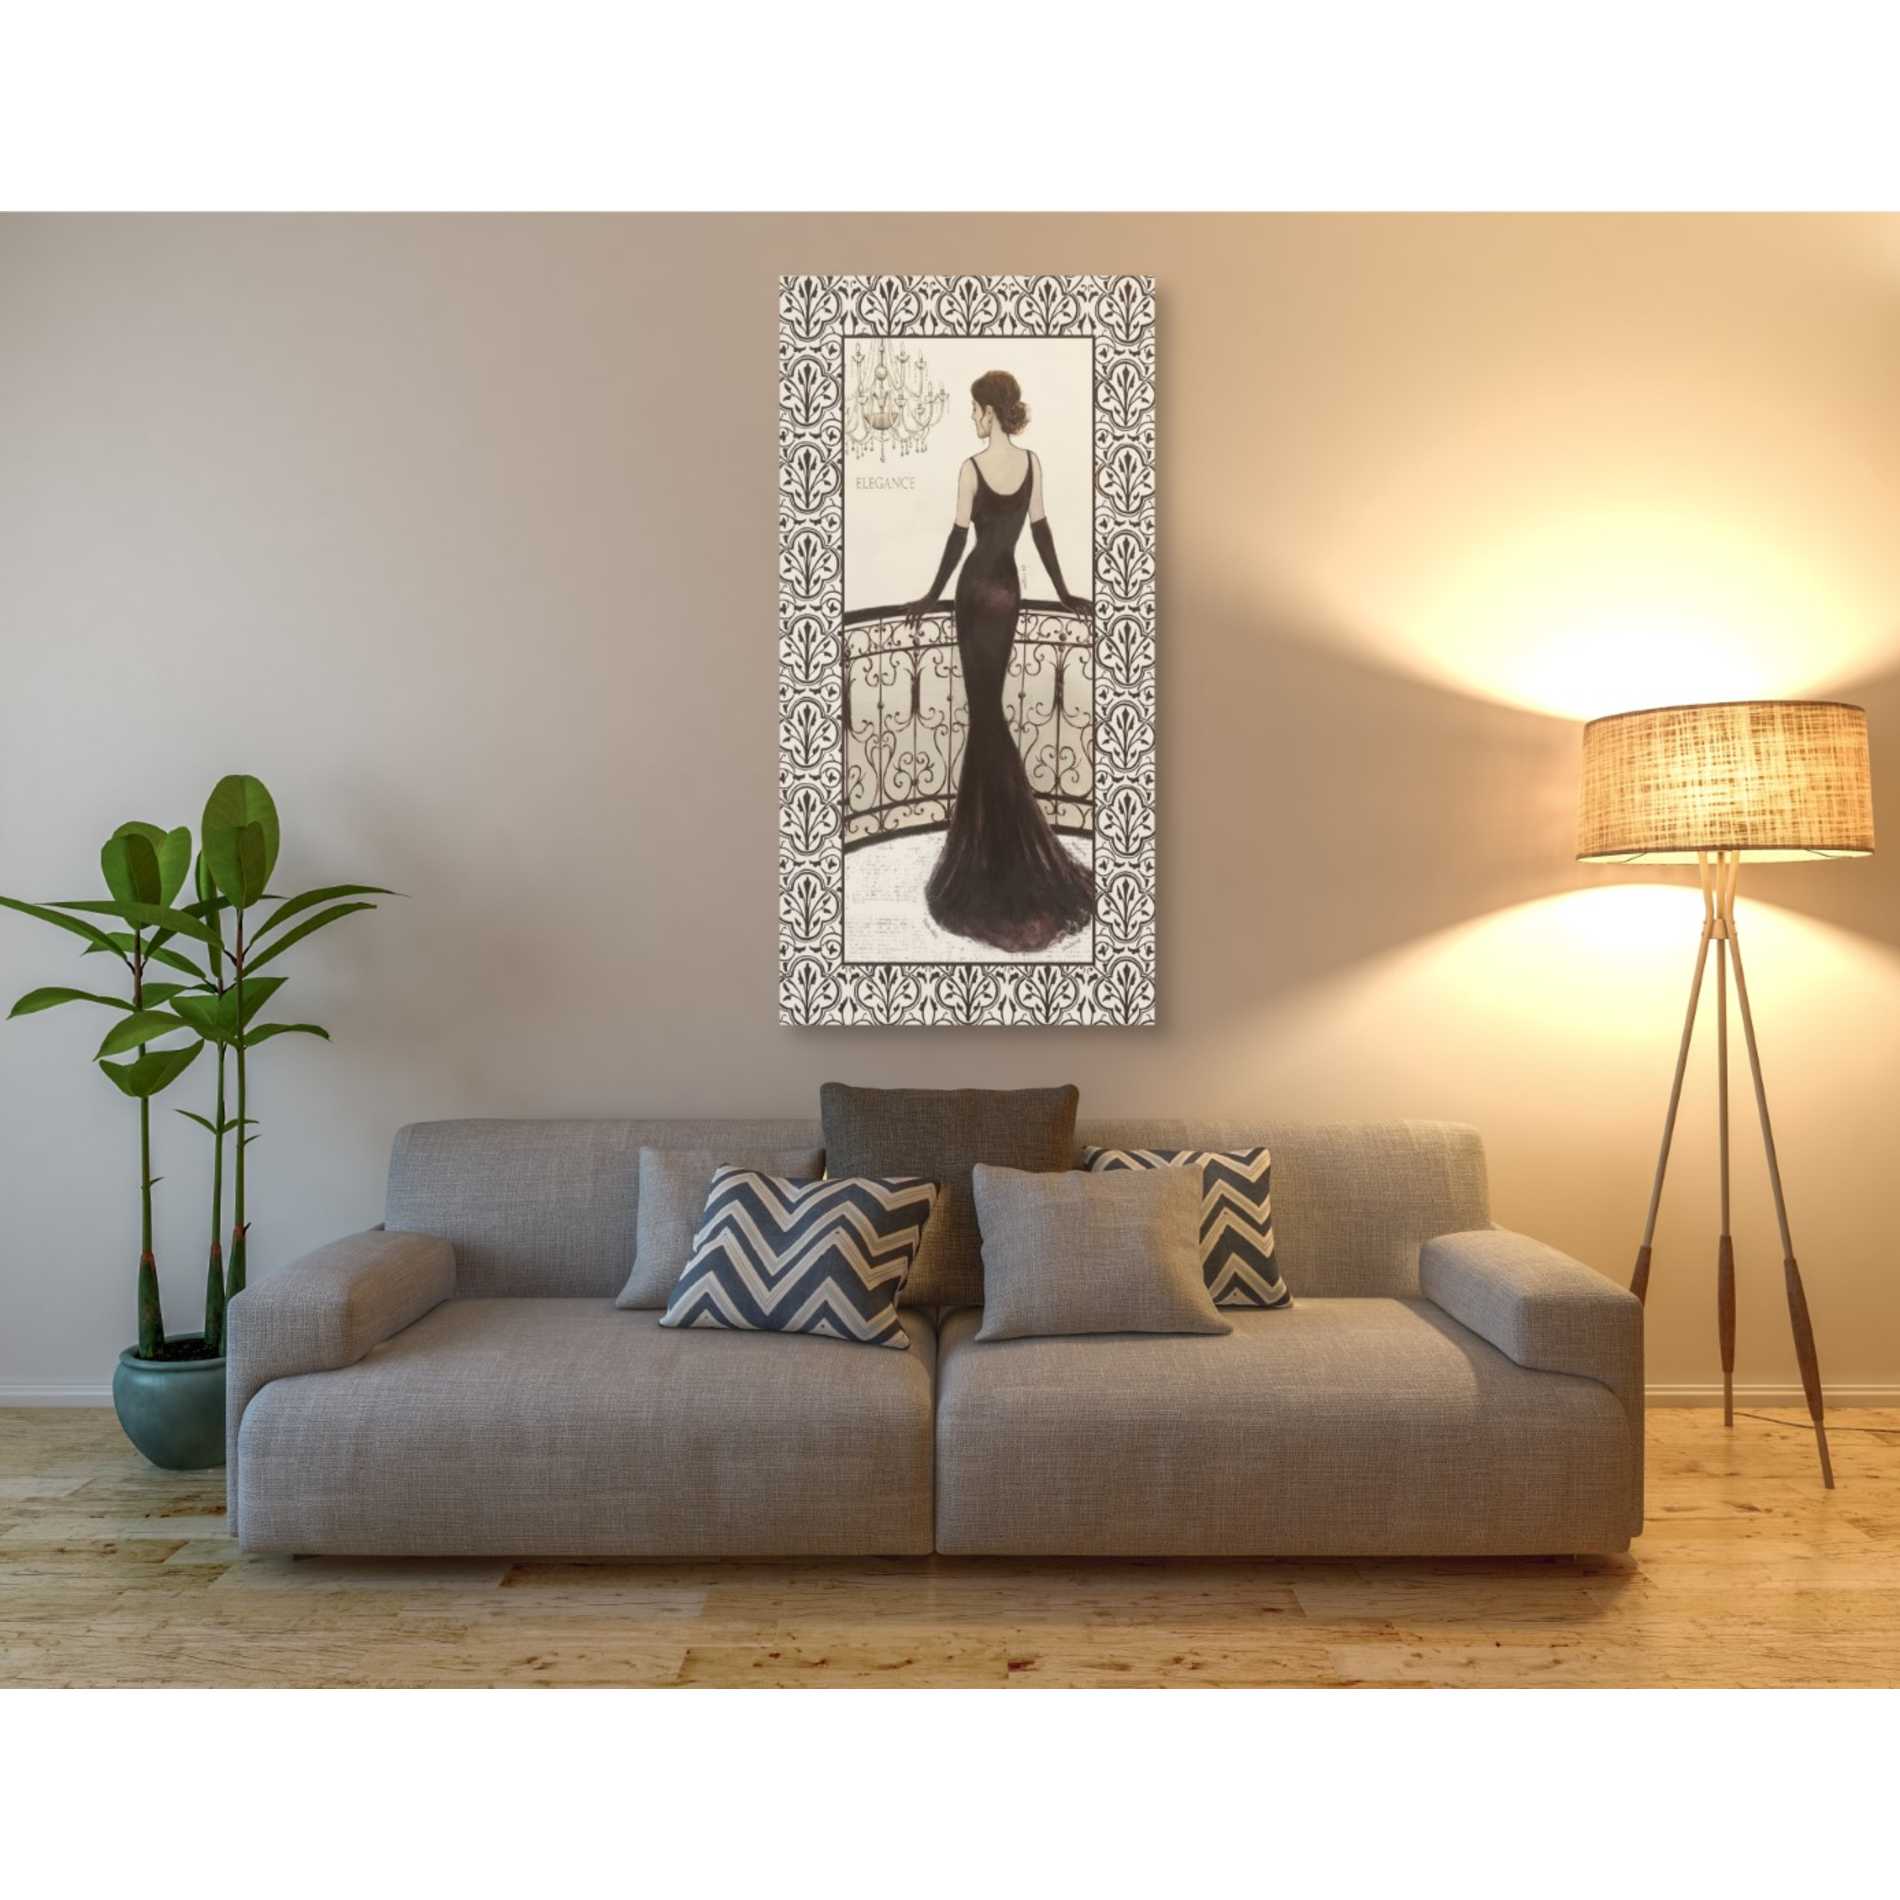 Epic Graffiti 'La Belle Noir with Floral Cartouche Border  4' by Emily Adams, Giclee Canvas Wall Art